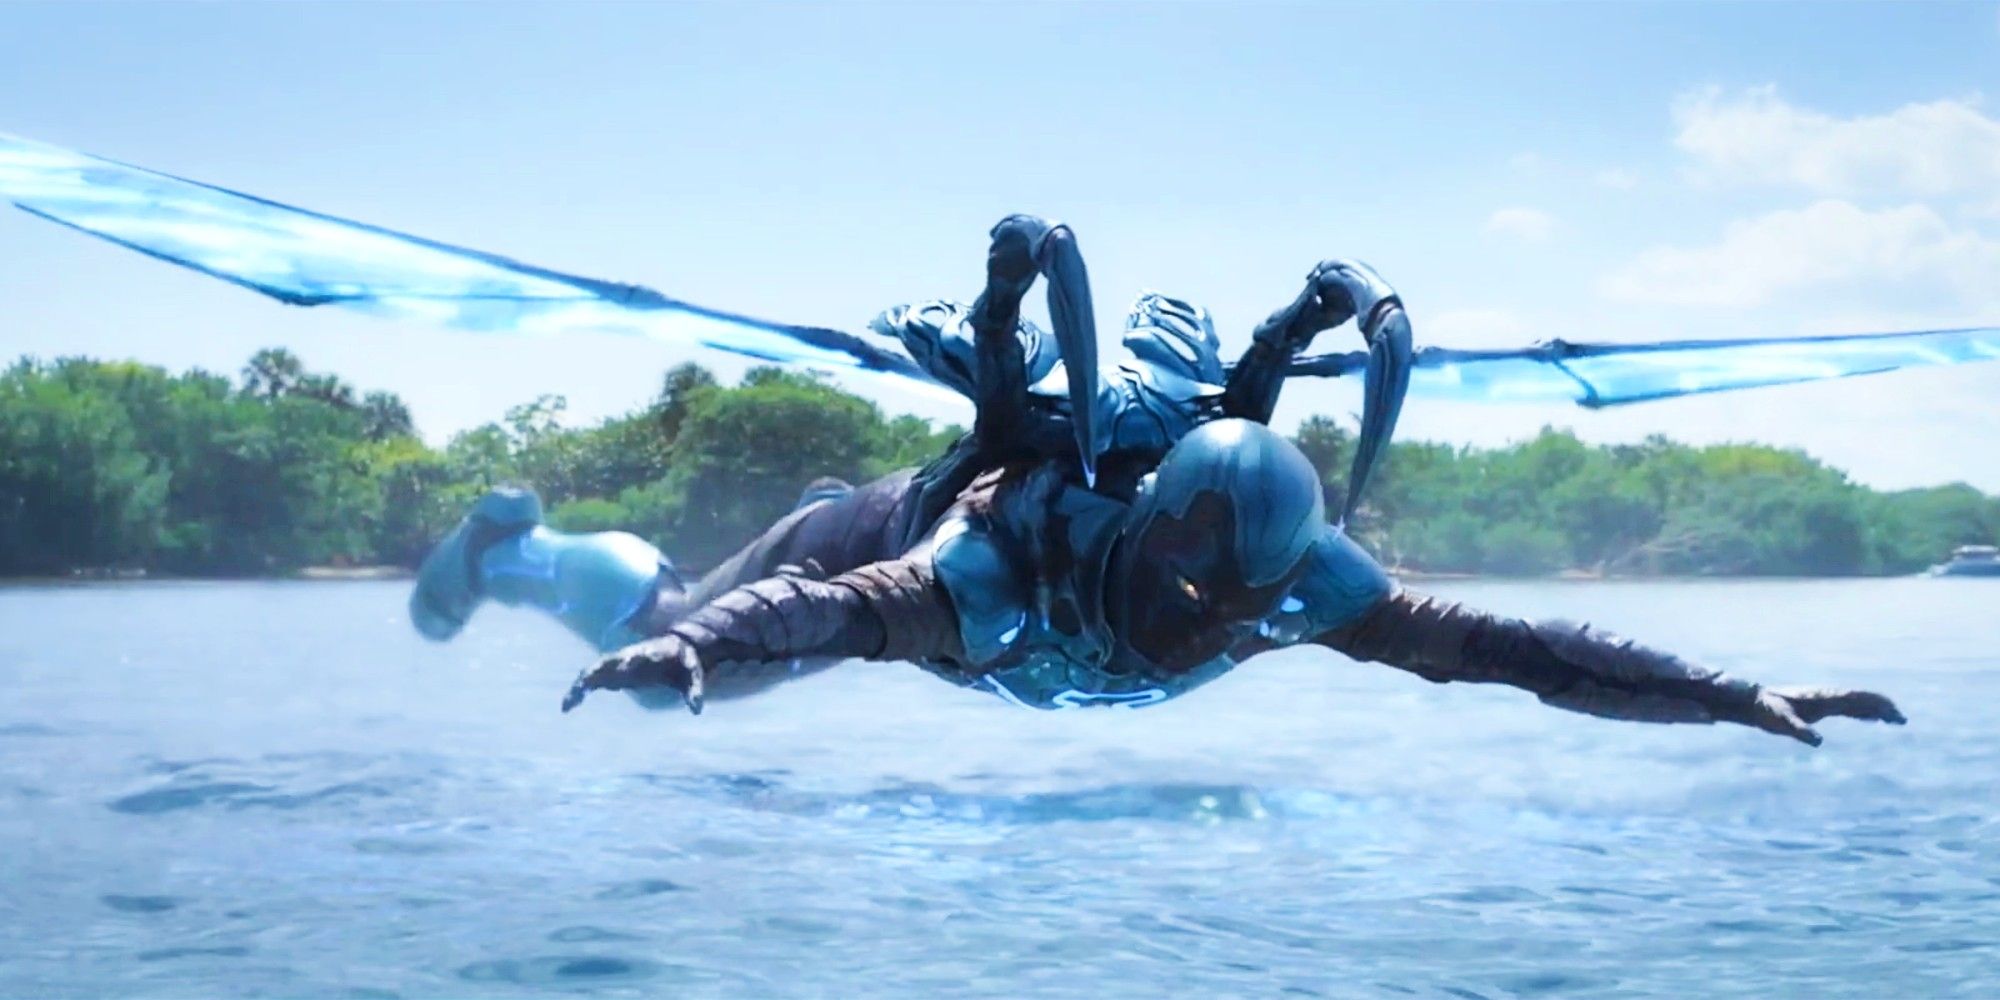 Blue Beetle hovering over water in trailer